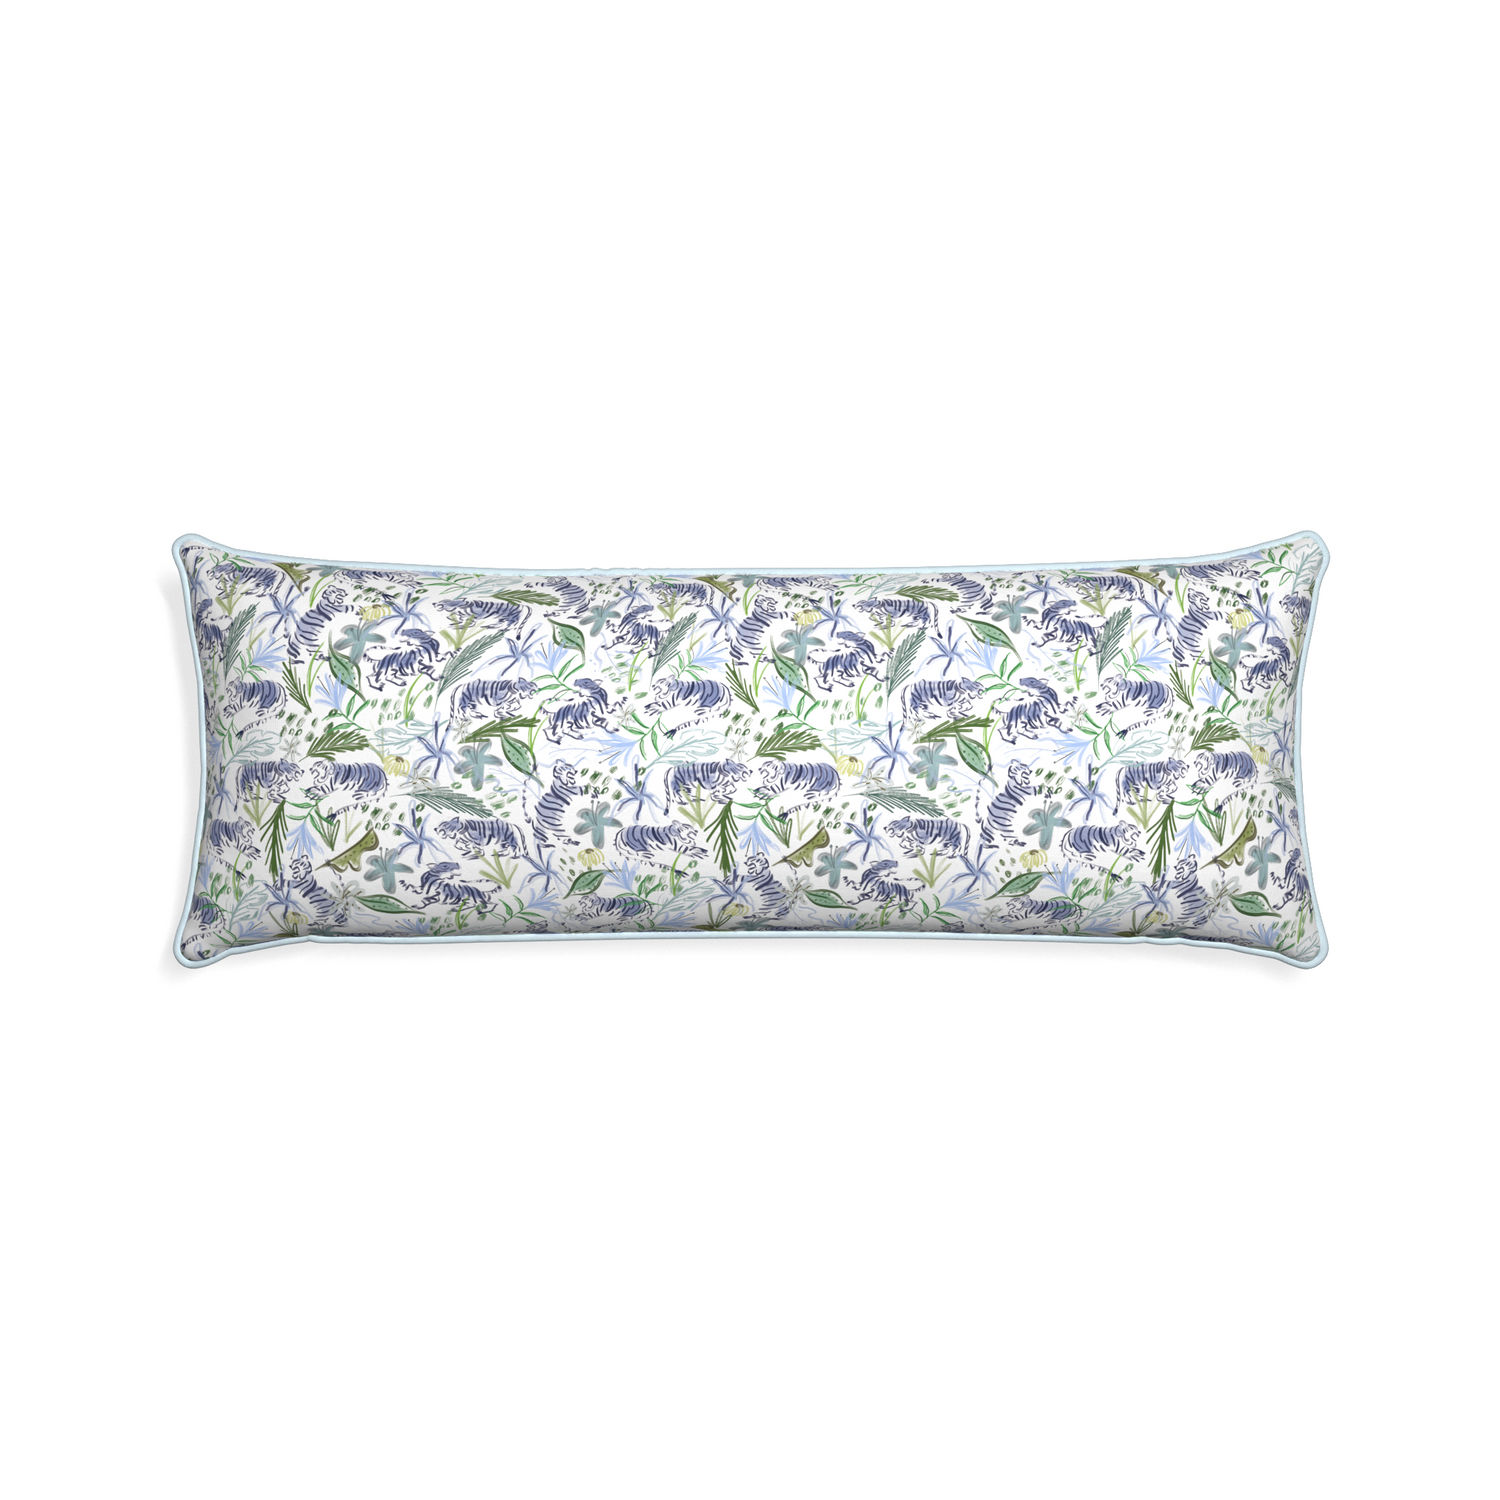 Xl-lumbar frida green custom pillow with powder piping on white background